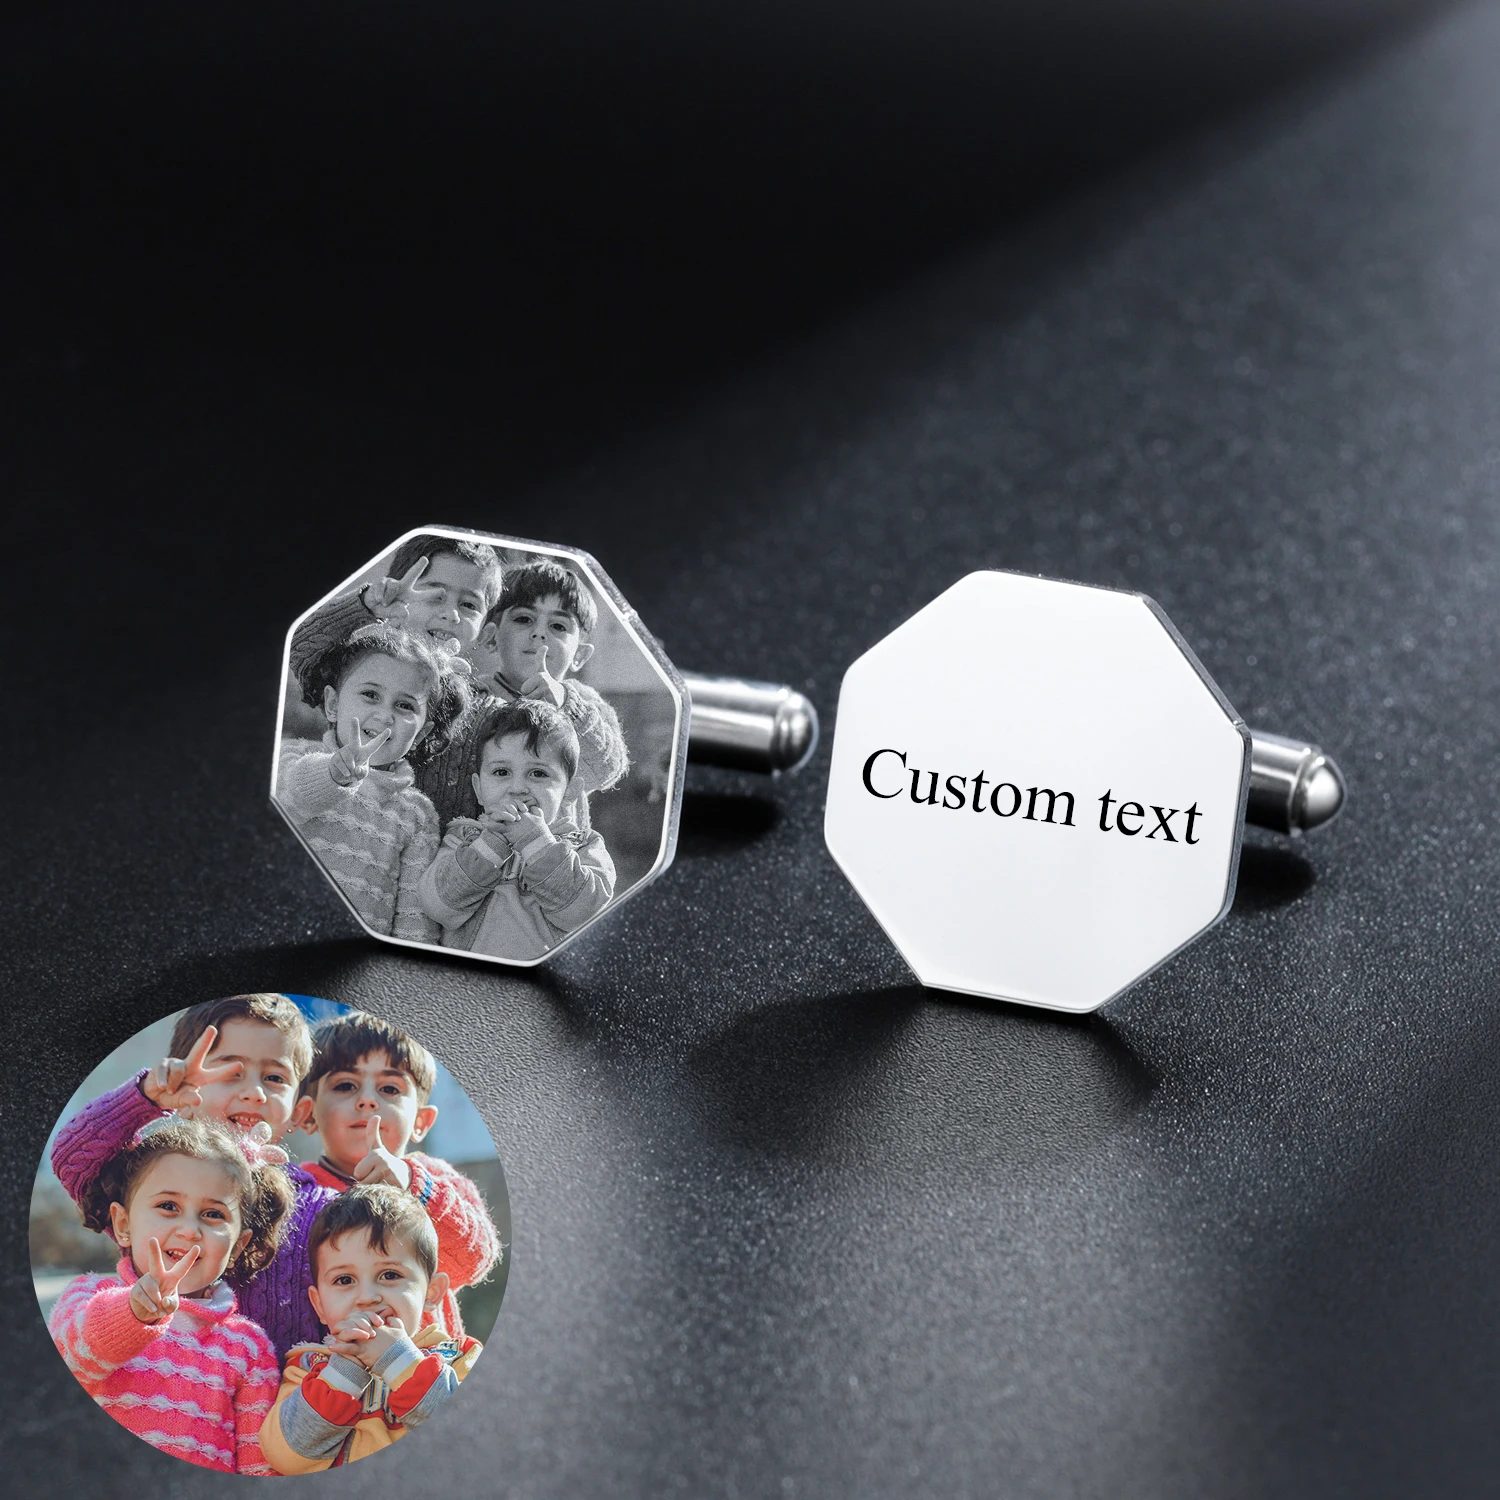 Custom Name Cufflinks Engraving picture Name Cufflinks Buttons Wedding Gifts Sliver Hexagon Suit Cufflinks Men Jewelry Gifts